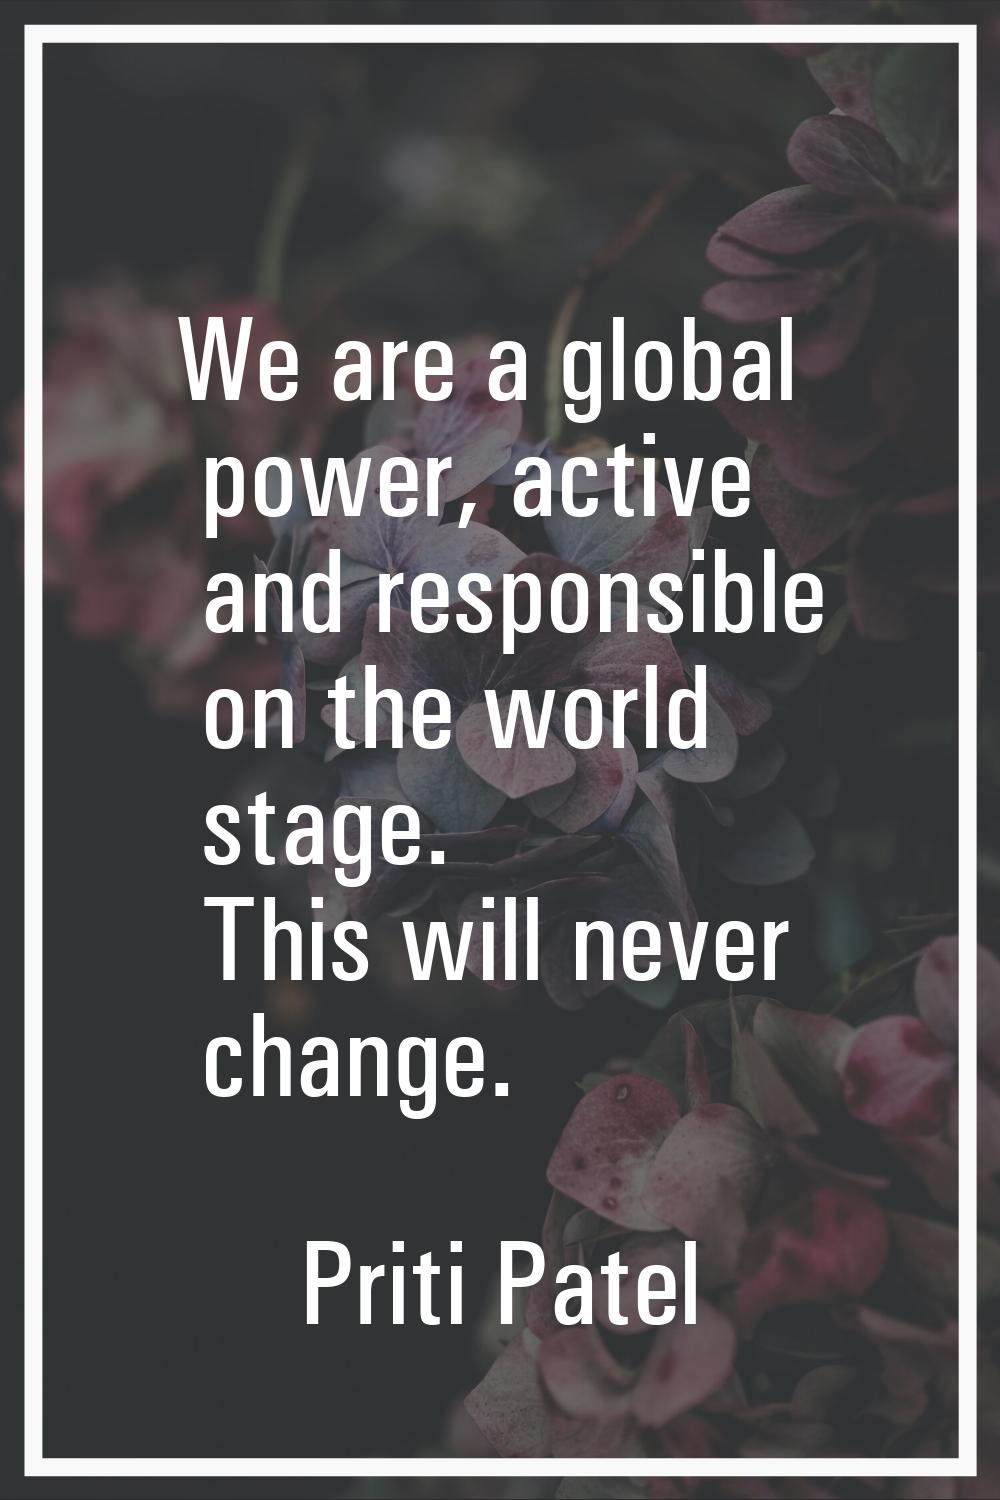 We are a global power, active and responsible on the world stage. This will never change.